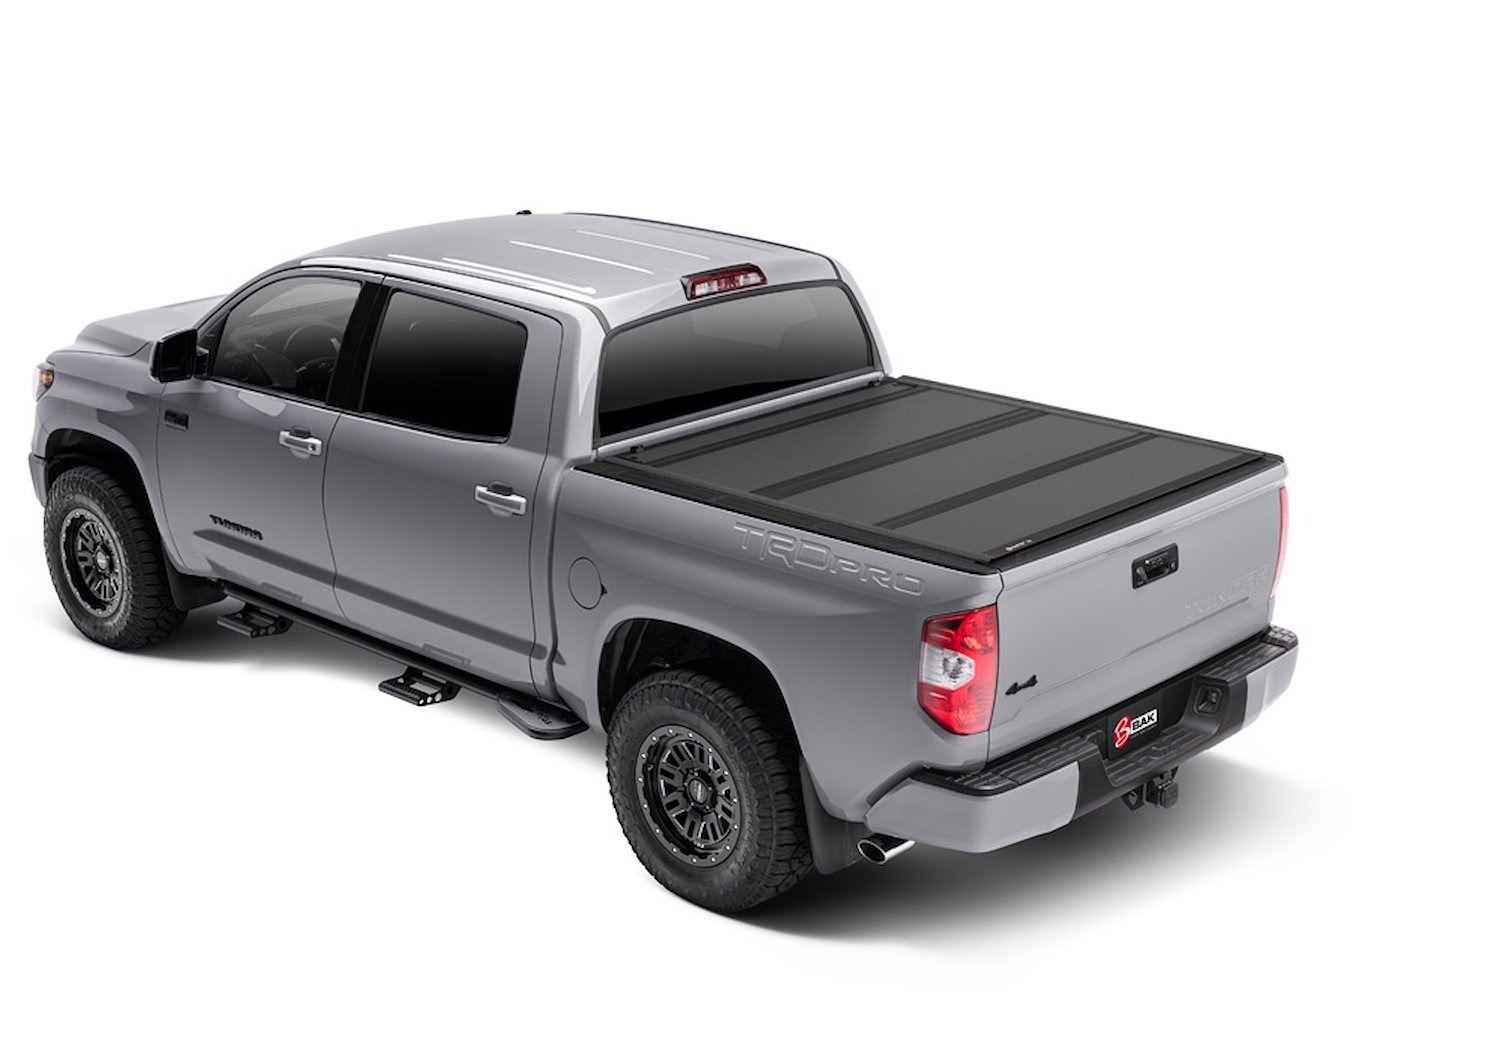 448441 BAKFlip MX4 for Fits Select Toyota Tundra 6.6 ft. Bed, Hard Folding Cover Style [Black Finish]